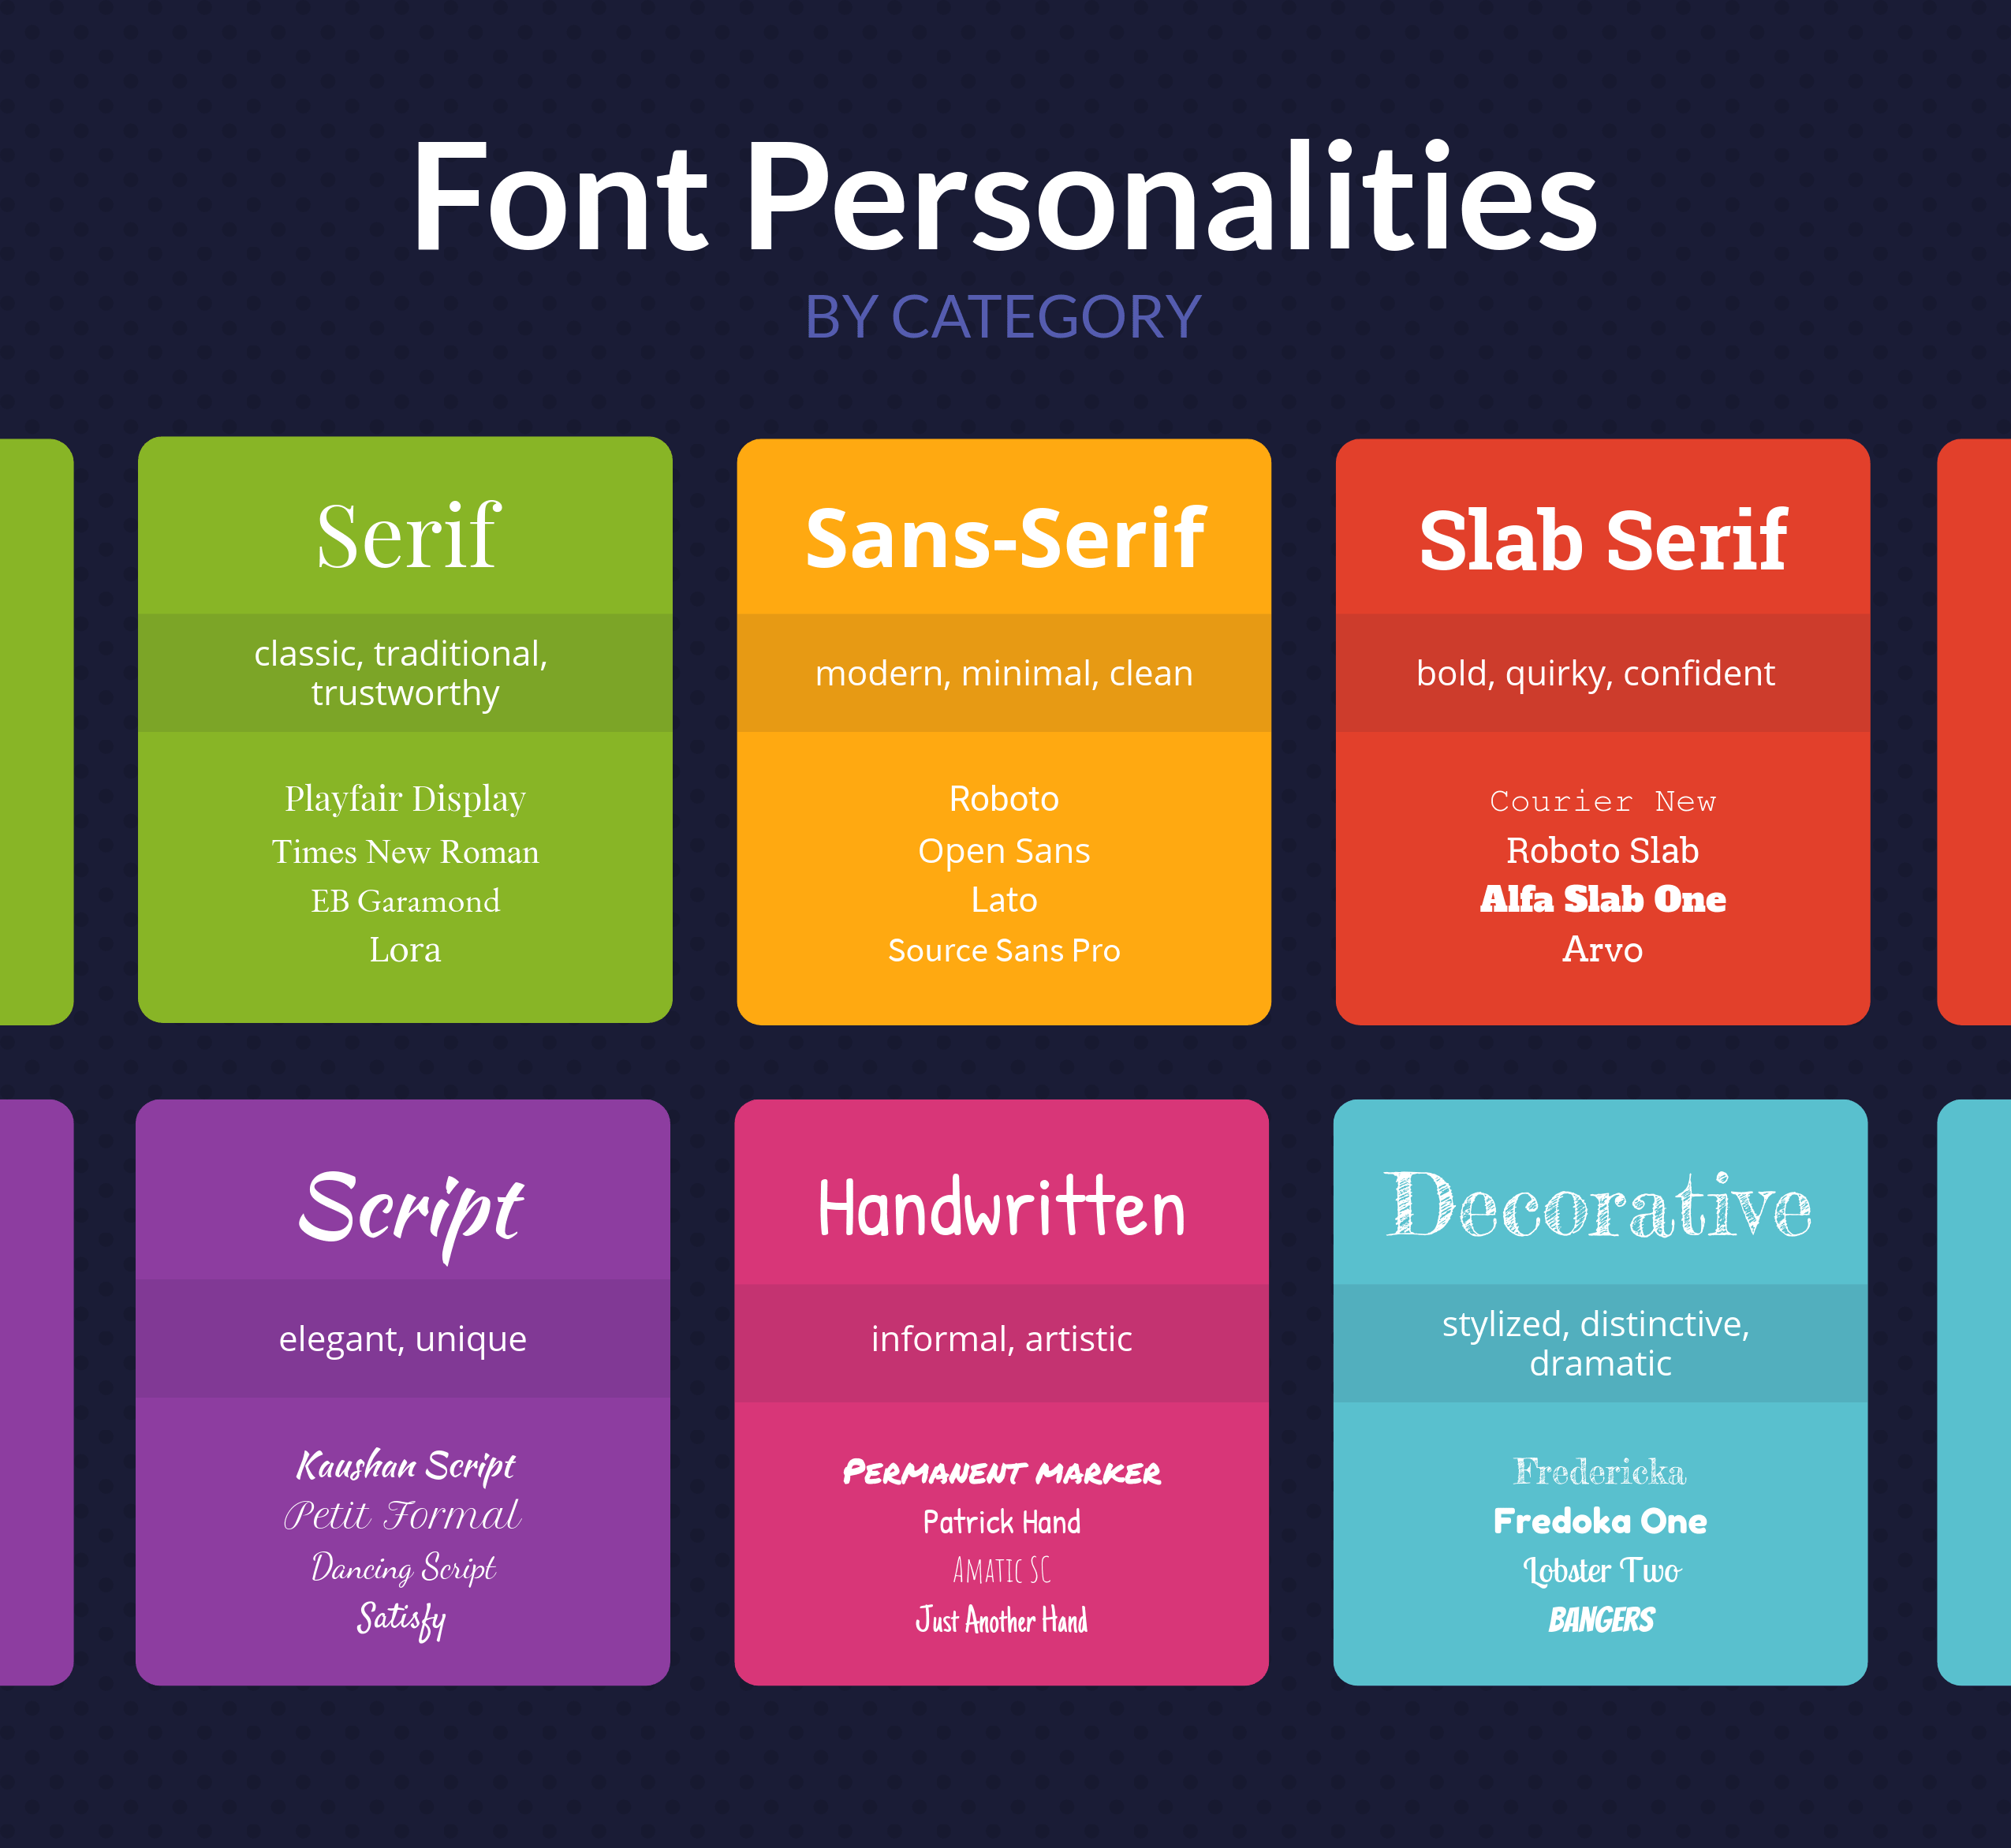 font-categories-personalities.png